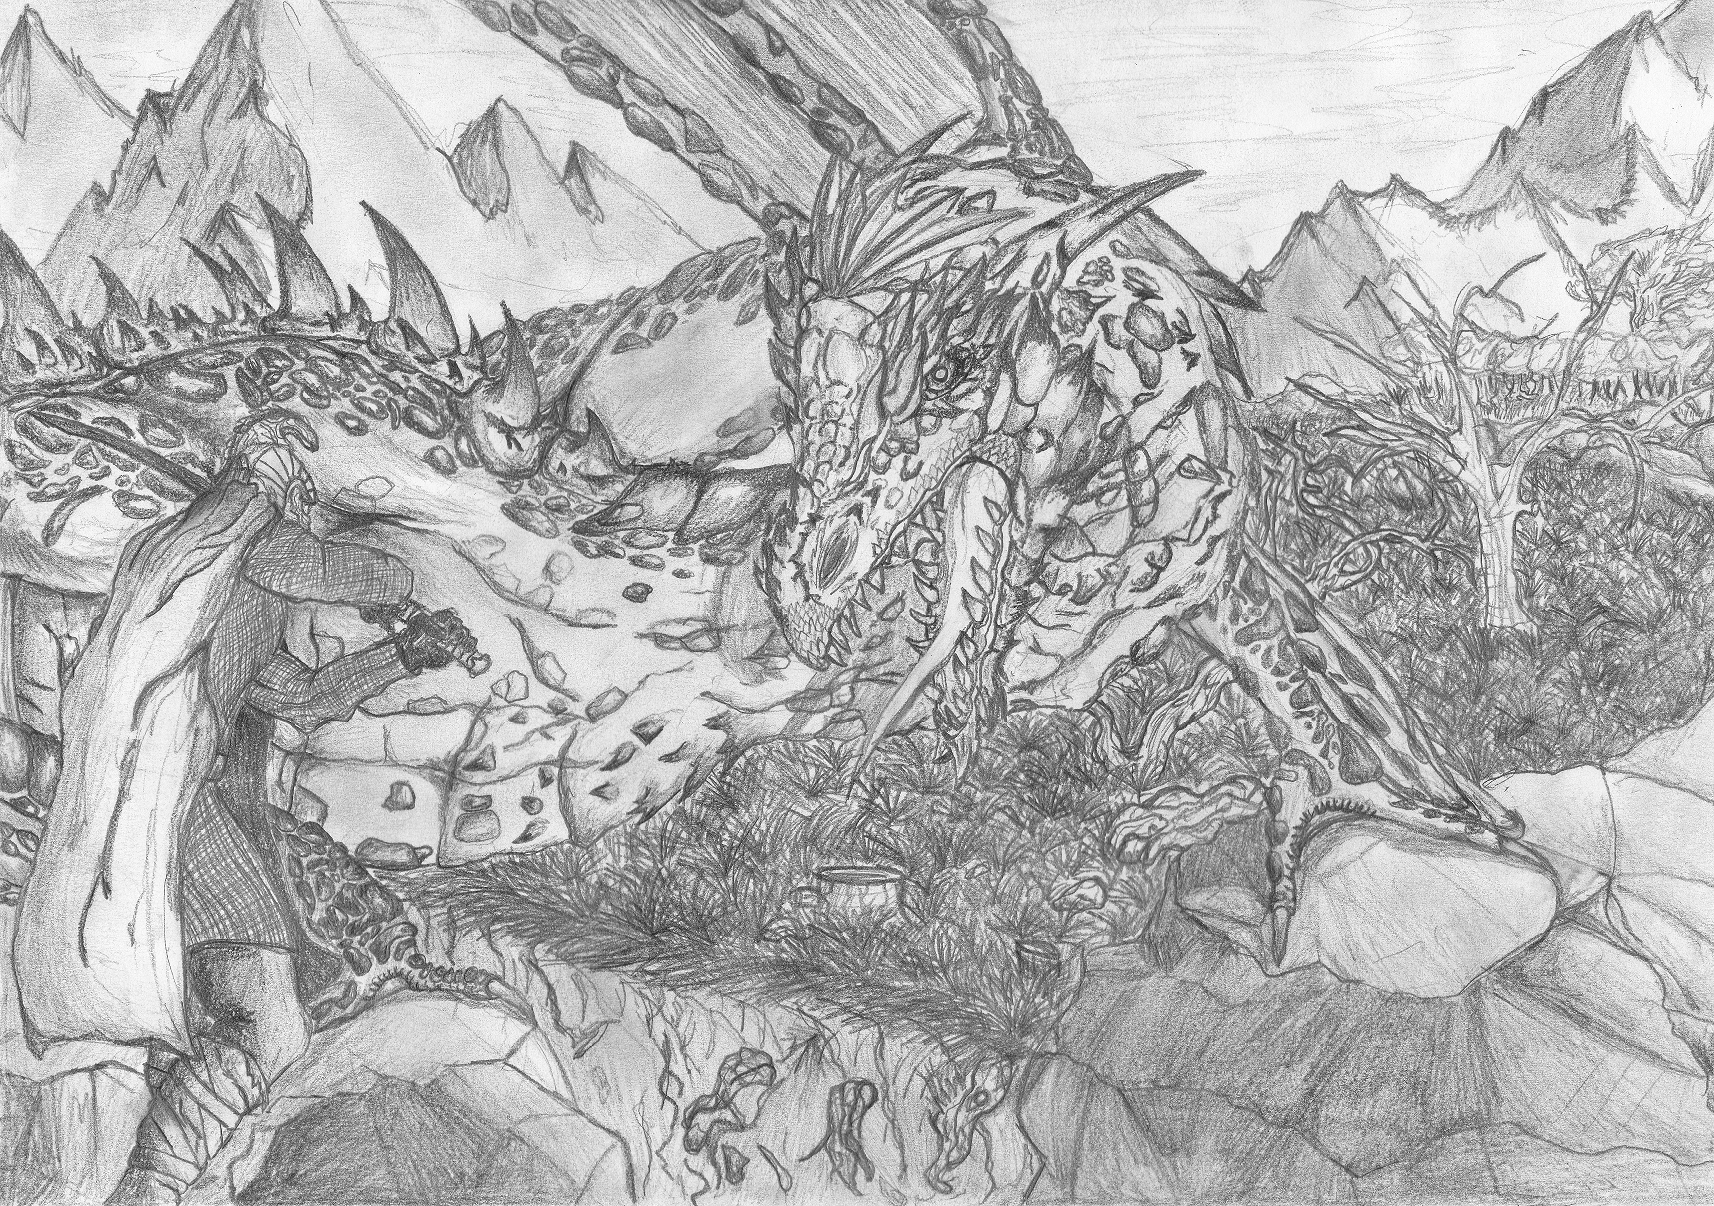 Turin confronts Glaurung by TurnerMohan : r/ImaginaryDragons